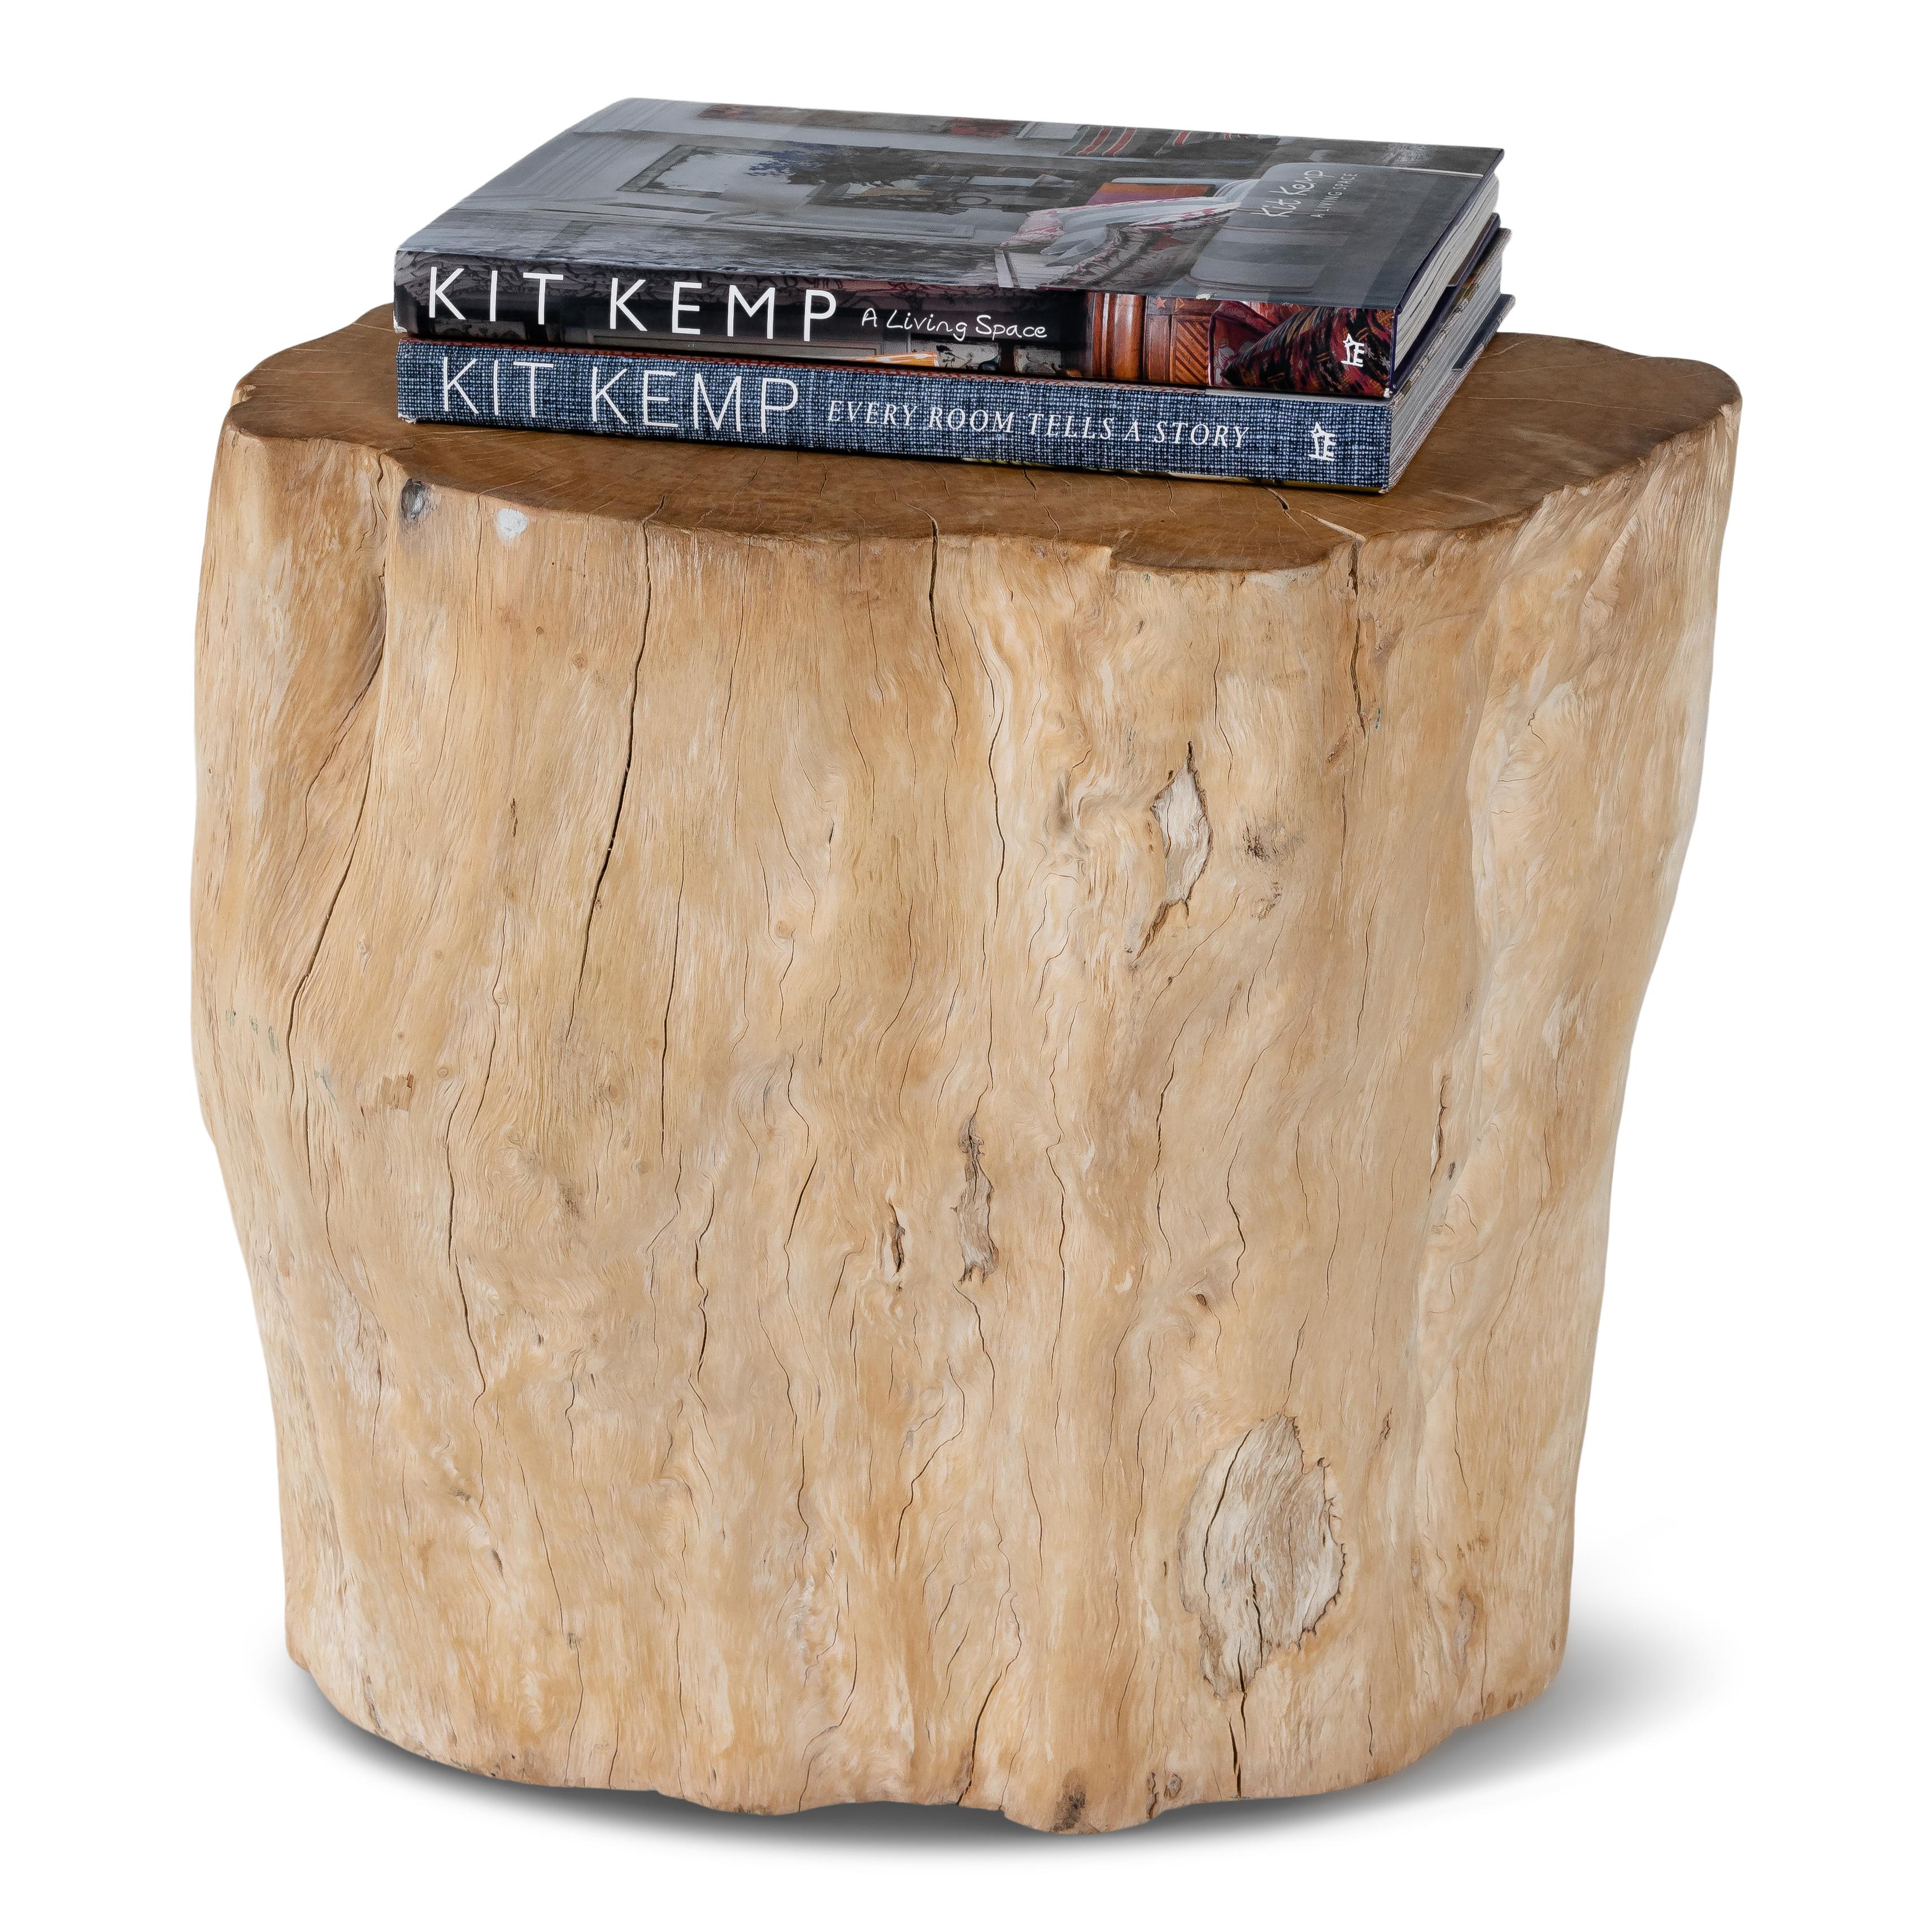 Organic form bleached iron wood stump table.

Piece from out one of a kind collection, Le Monde. Exclusive to Brendan Bass. 

Globally curated by Brendan Bass, Le Monde furniture and accessories offer modern sensibility, provincial construction,